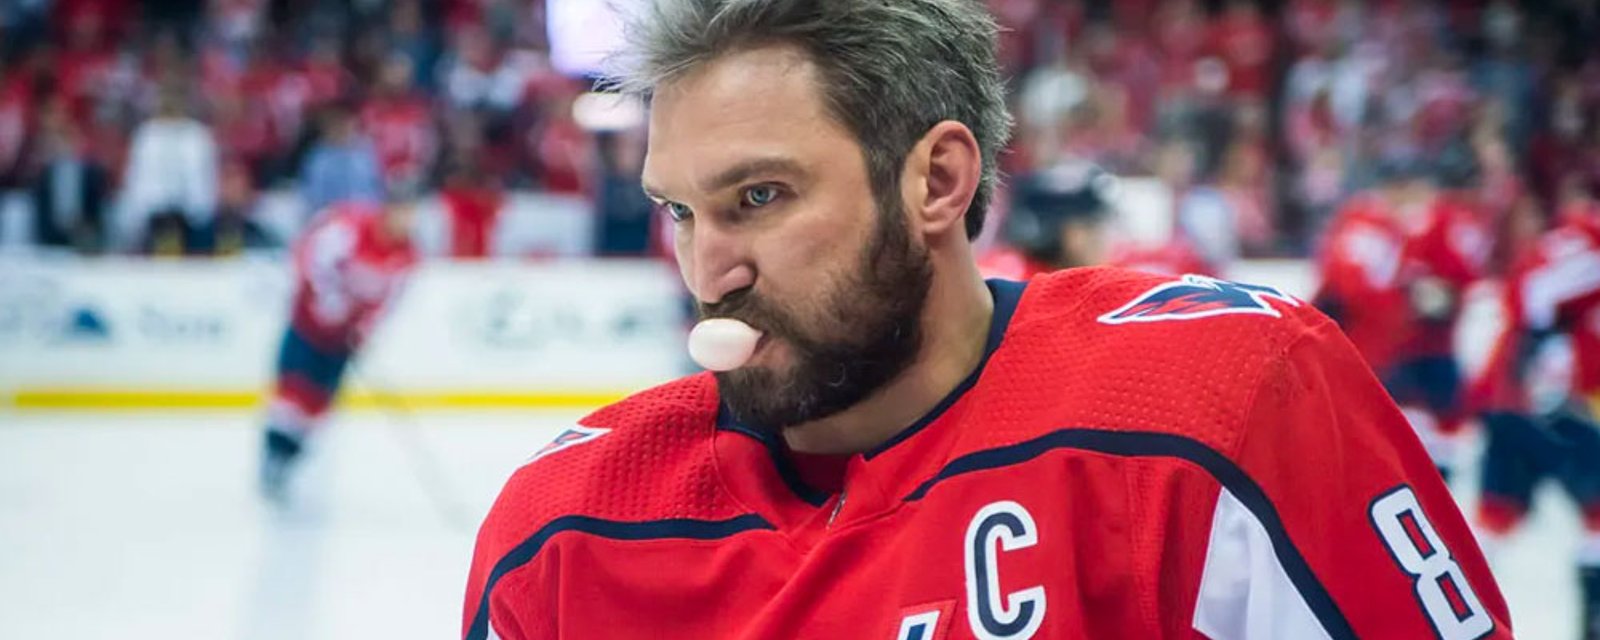 Alex Ovechkin makes a bold statement on NHL's new Pride policy